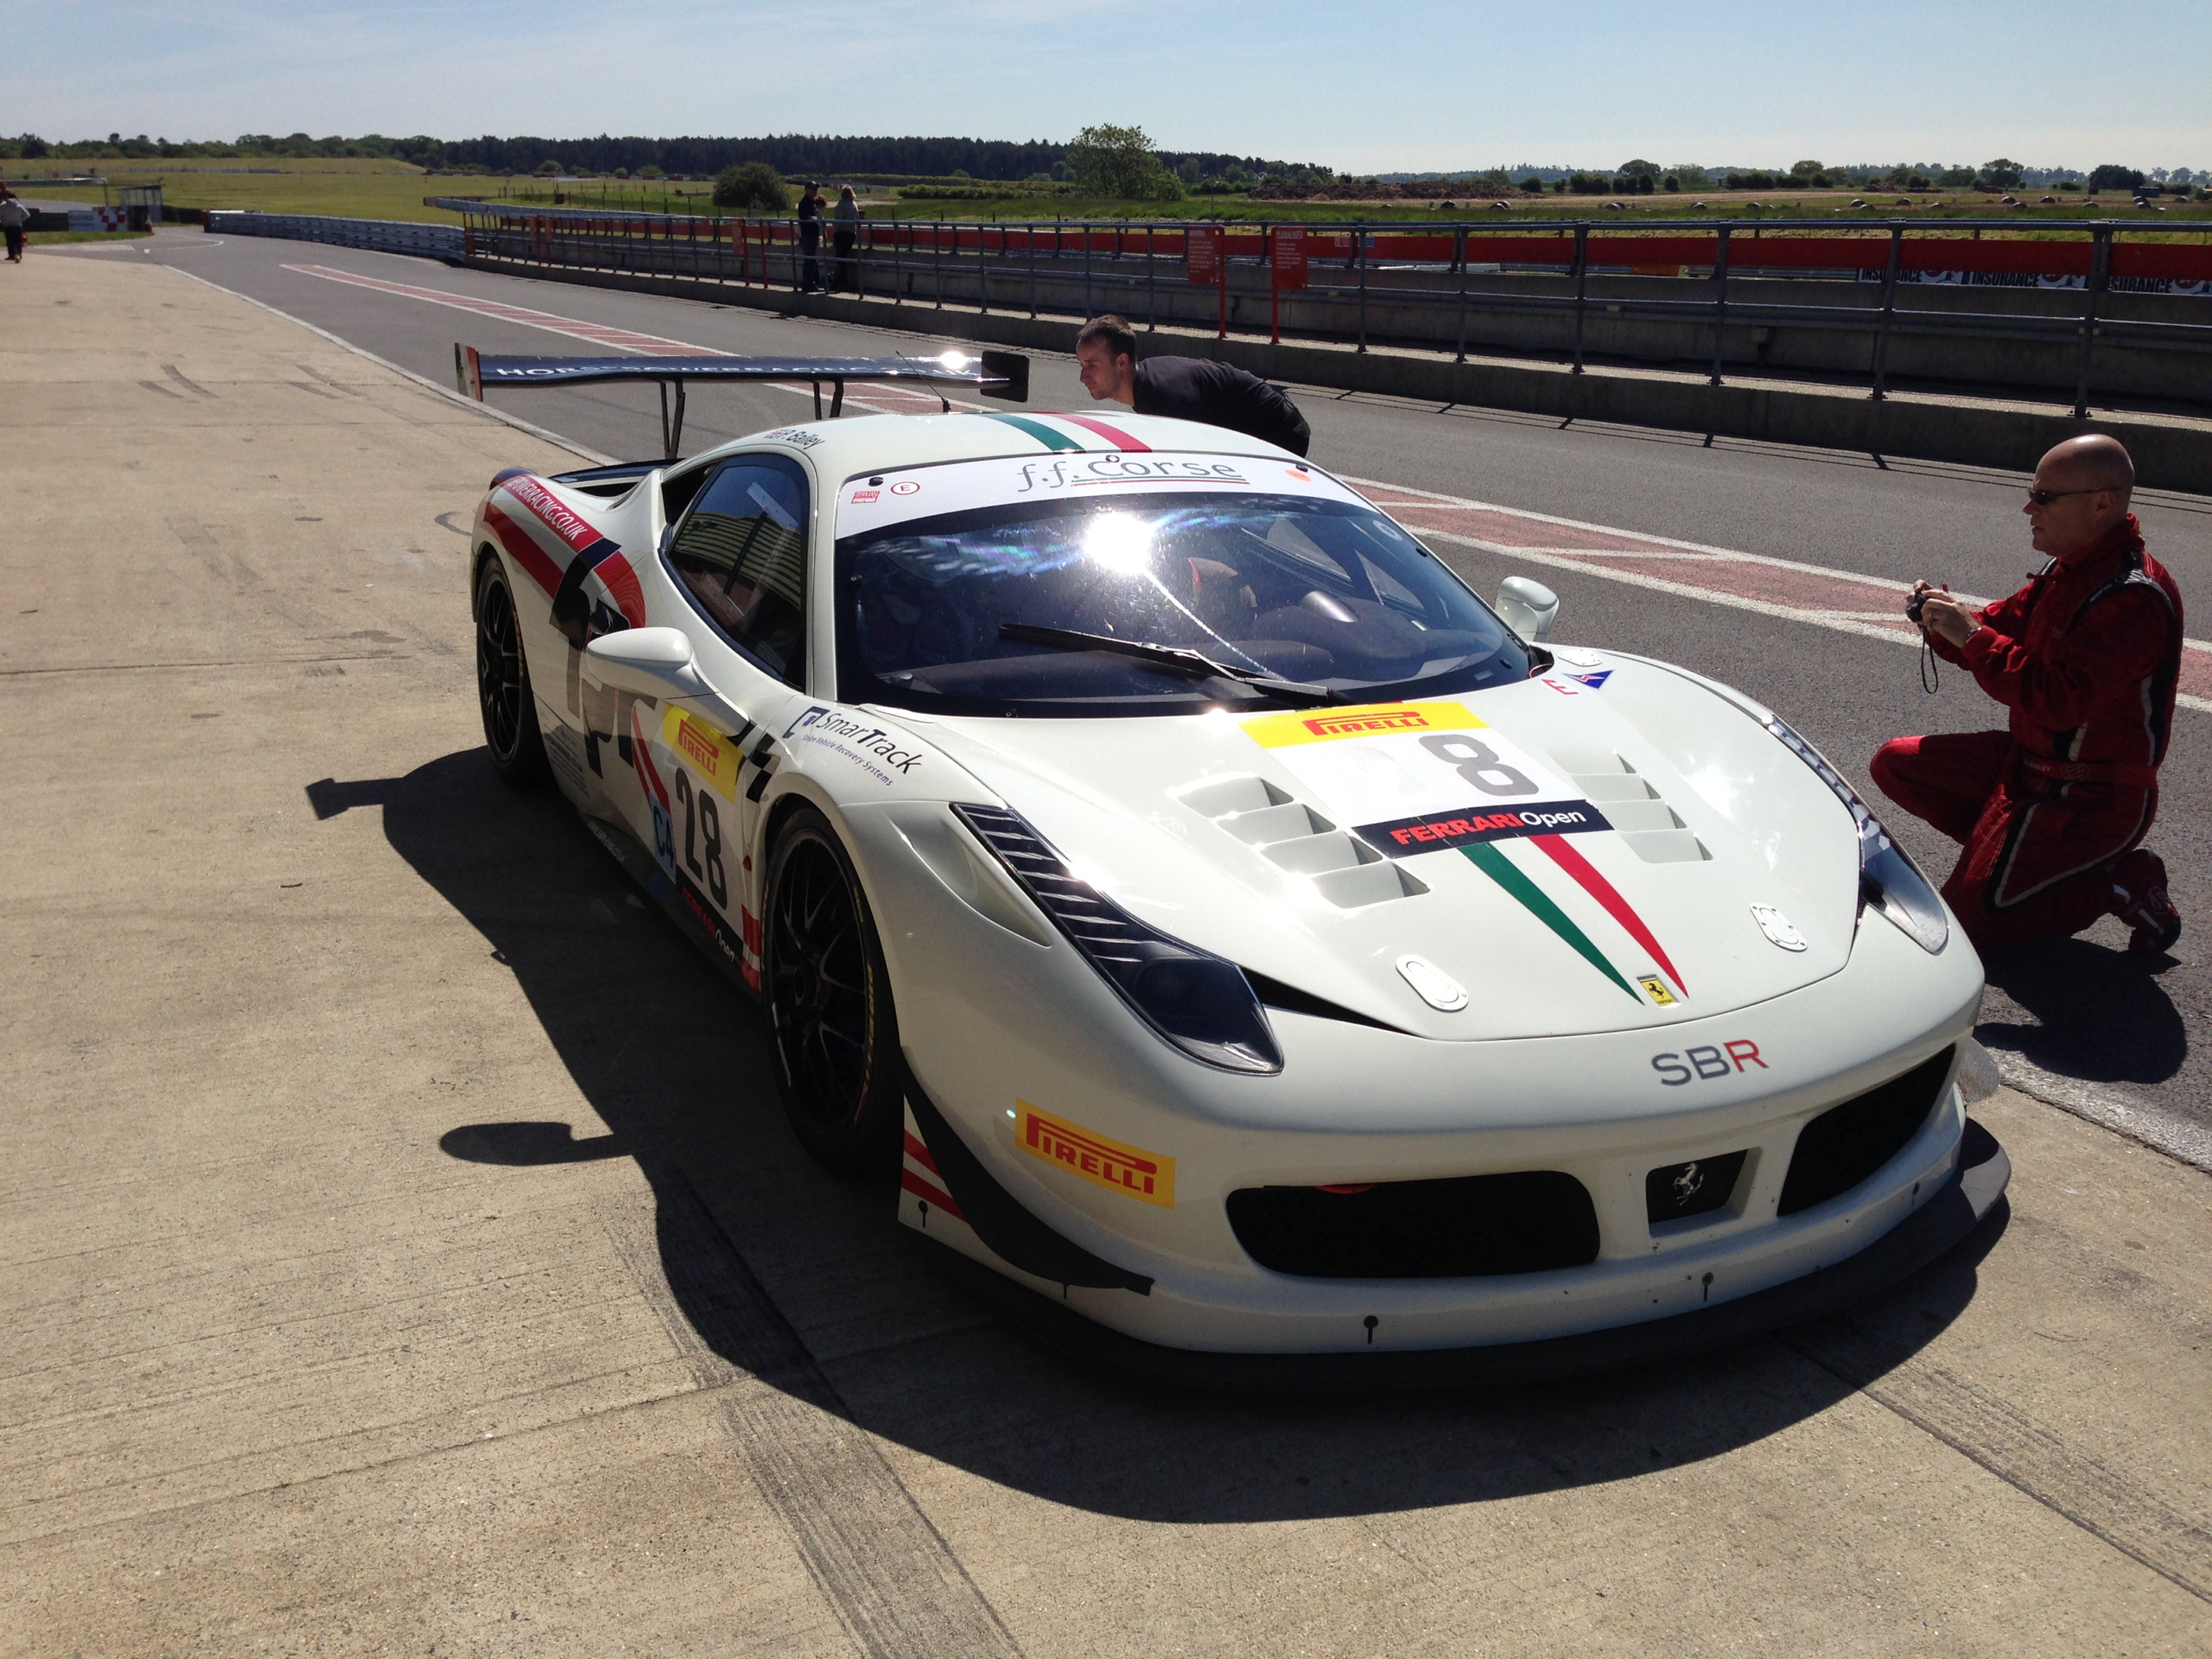 SB Race Engineering at snetterton test with 458 in 2012